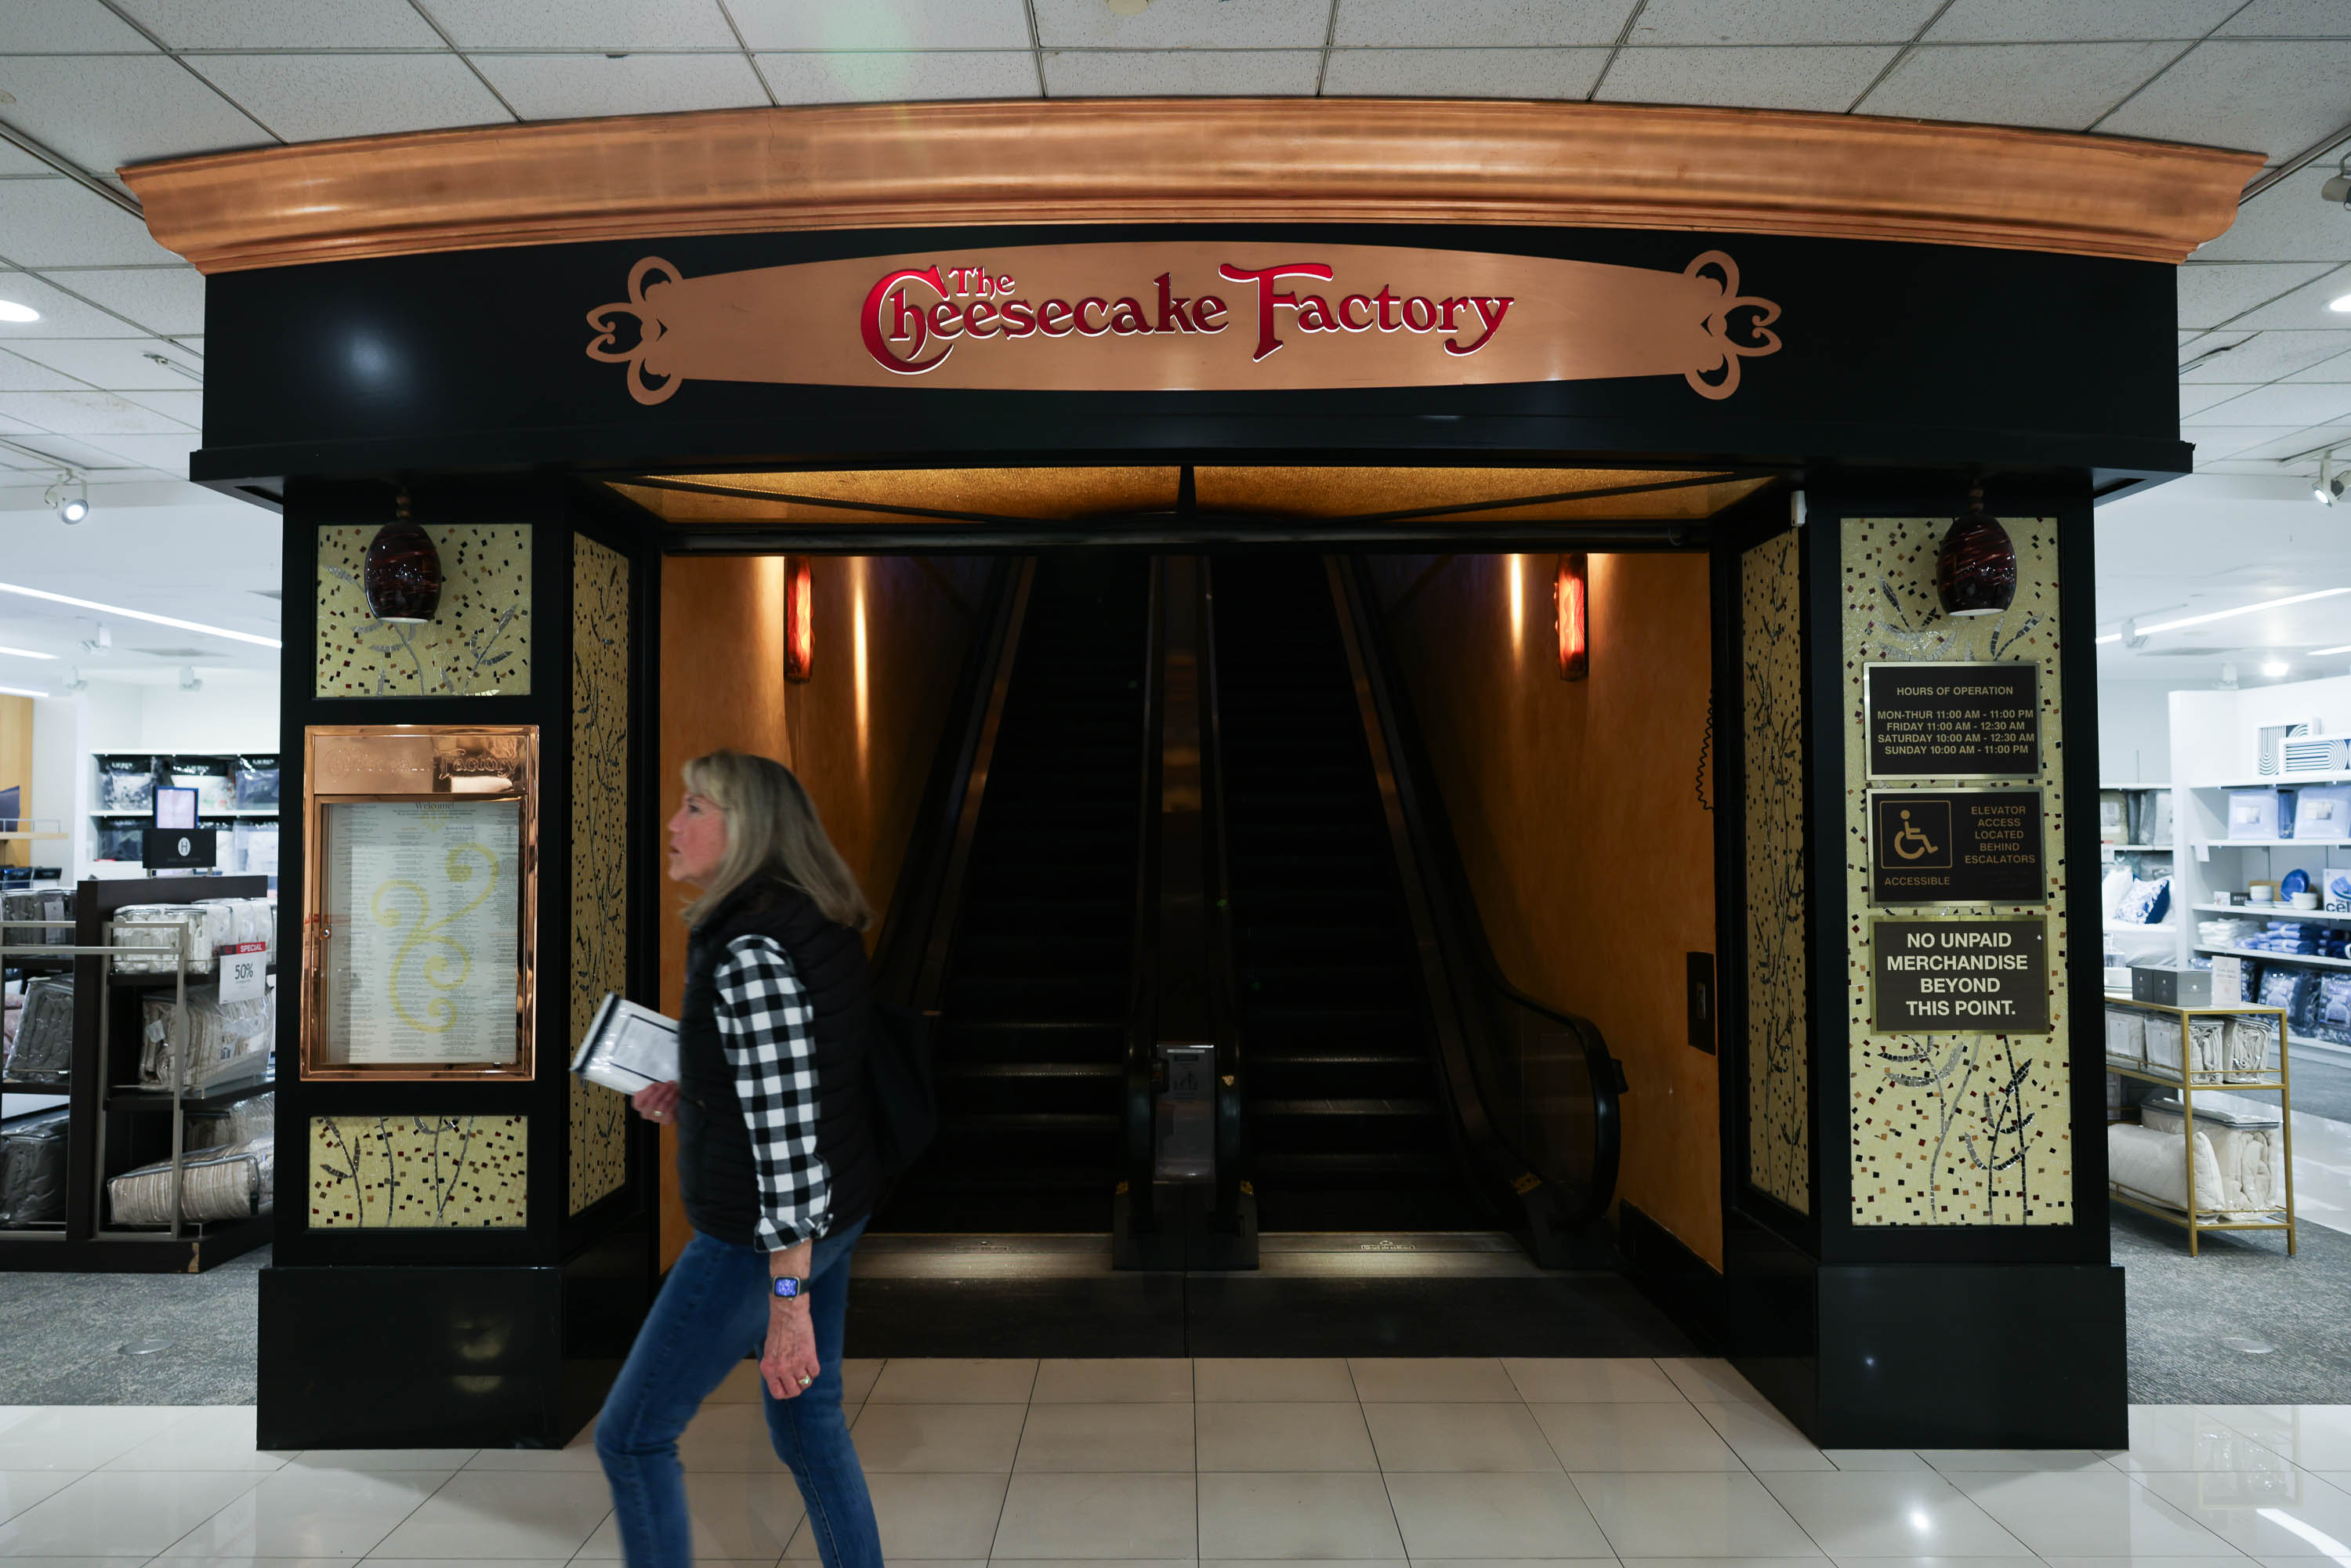 A person walks past the entrance to The Cheesecake Factory, with a menu displayed and an escalator inside.